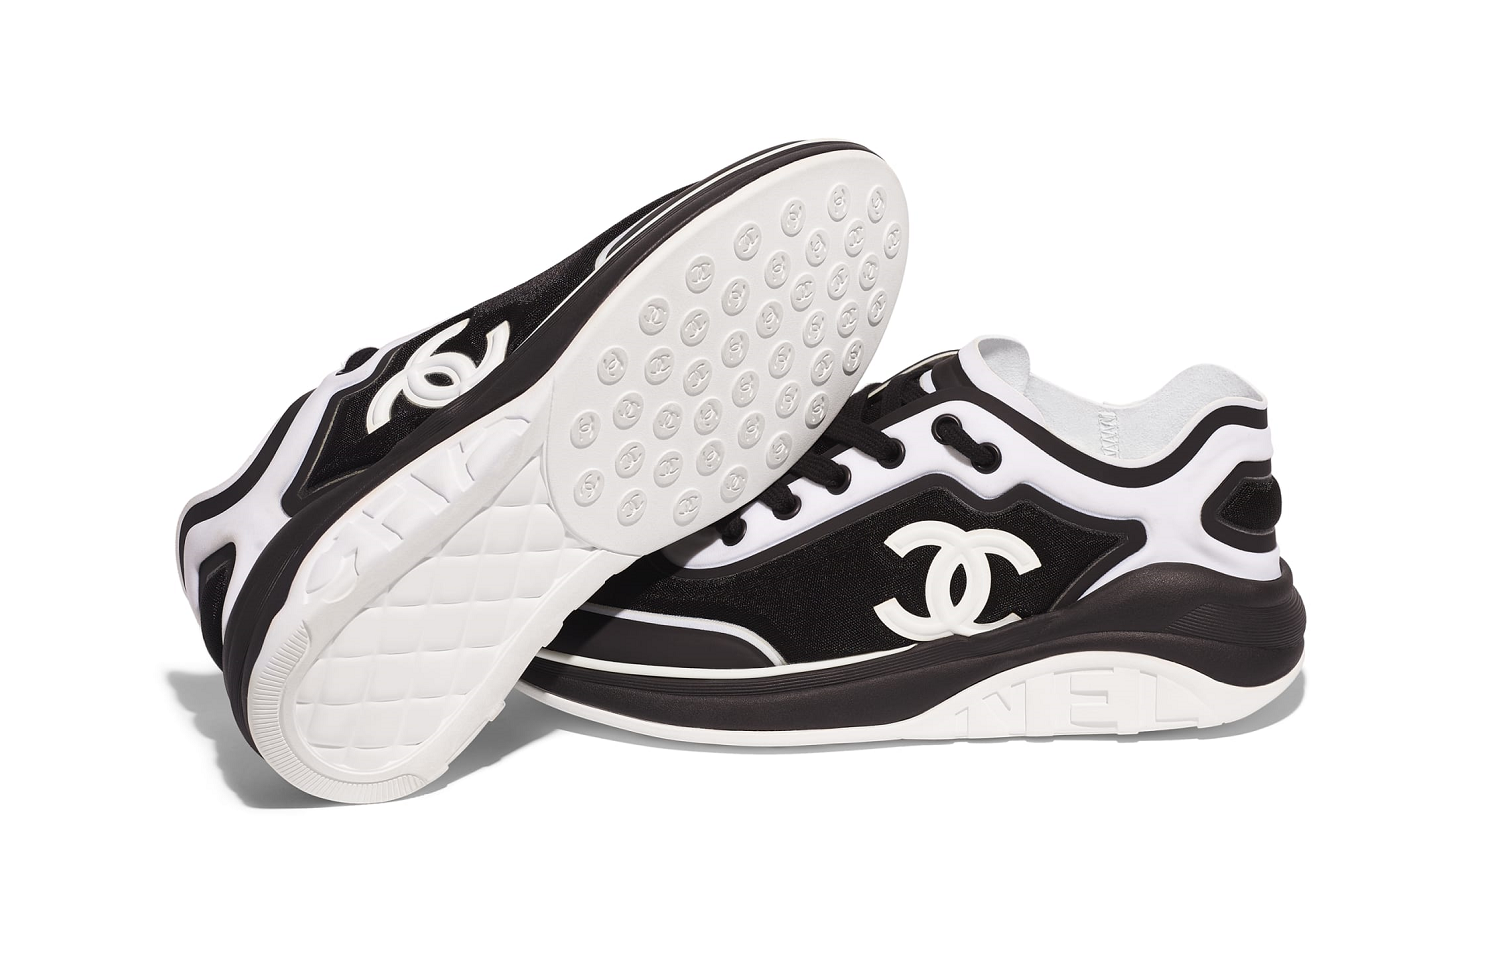 Chanel's Sring 2019 Sneakers Includes 